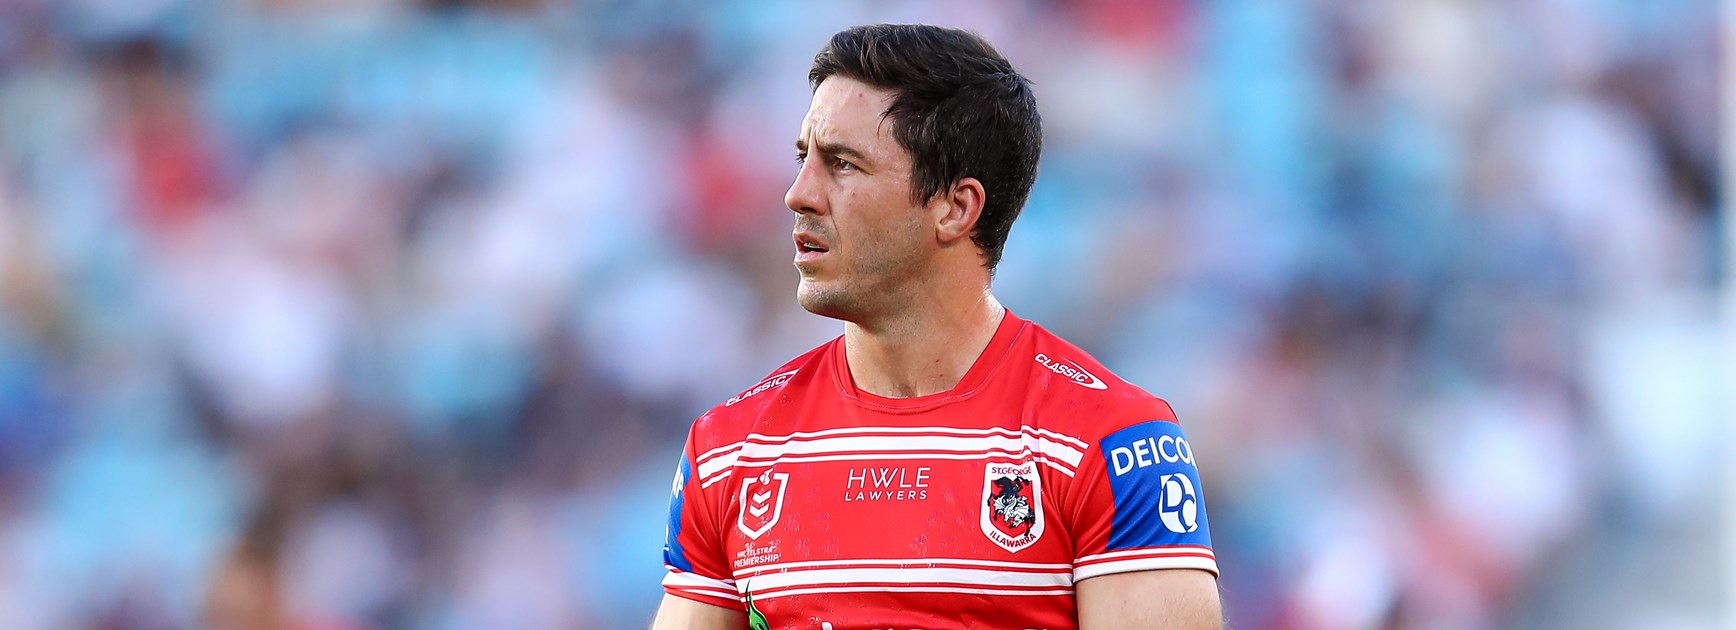 'Ben Hunt is contracted to the Dragons and we respect that': Broncos CEO